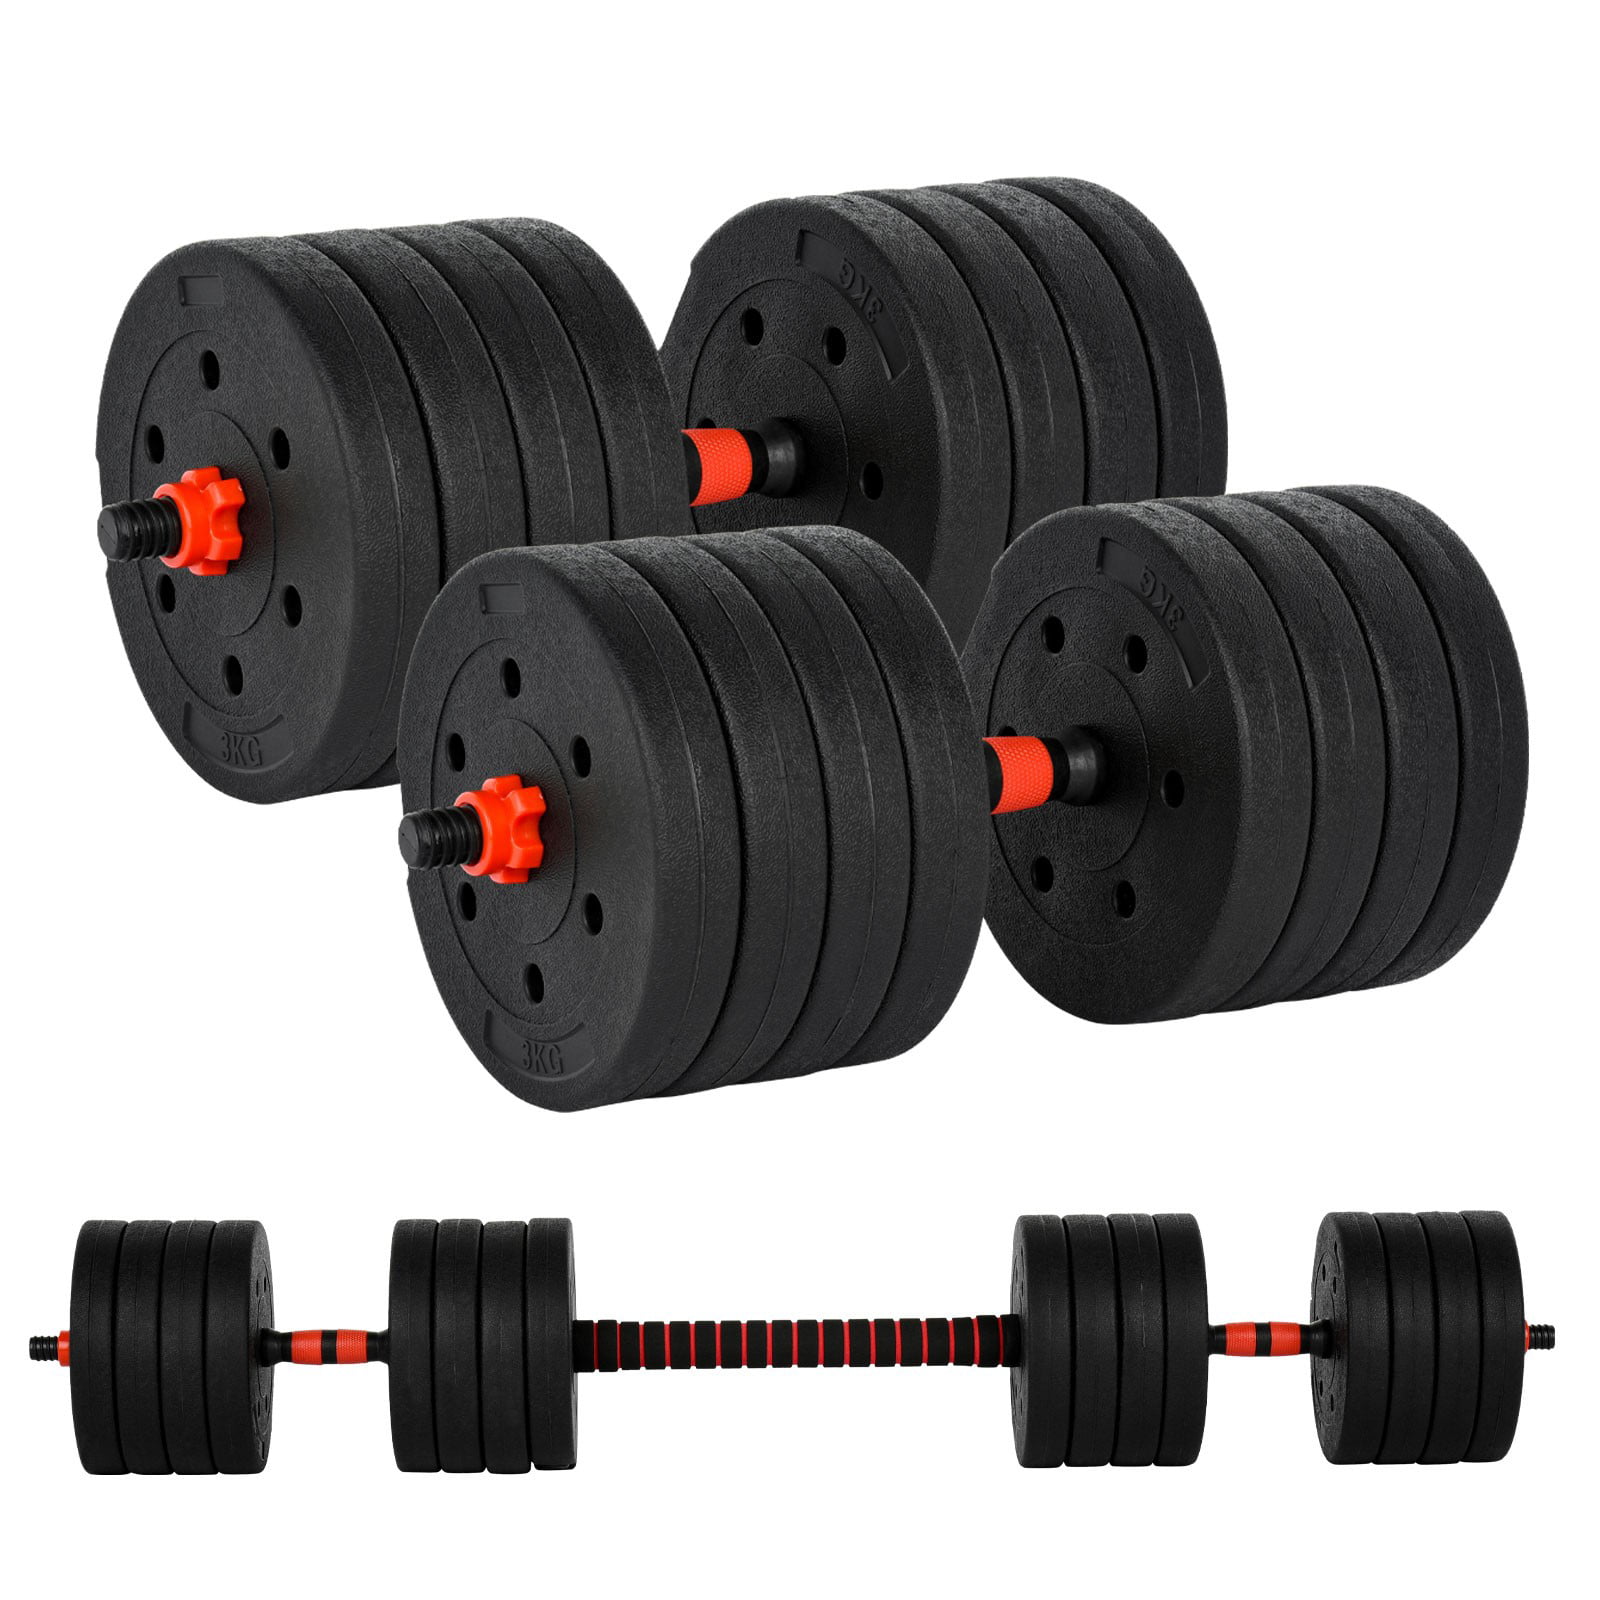 Popsport Adjustable Dumbbell Series Fitness Dumbbell Standard Adjustable Dumbbell with Handle and Weight Plate for Home Gym System Building Muscle 